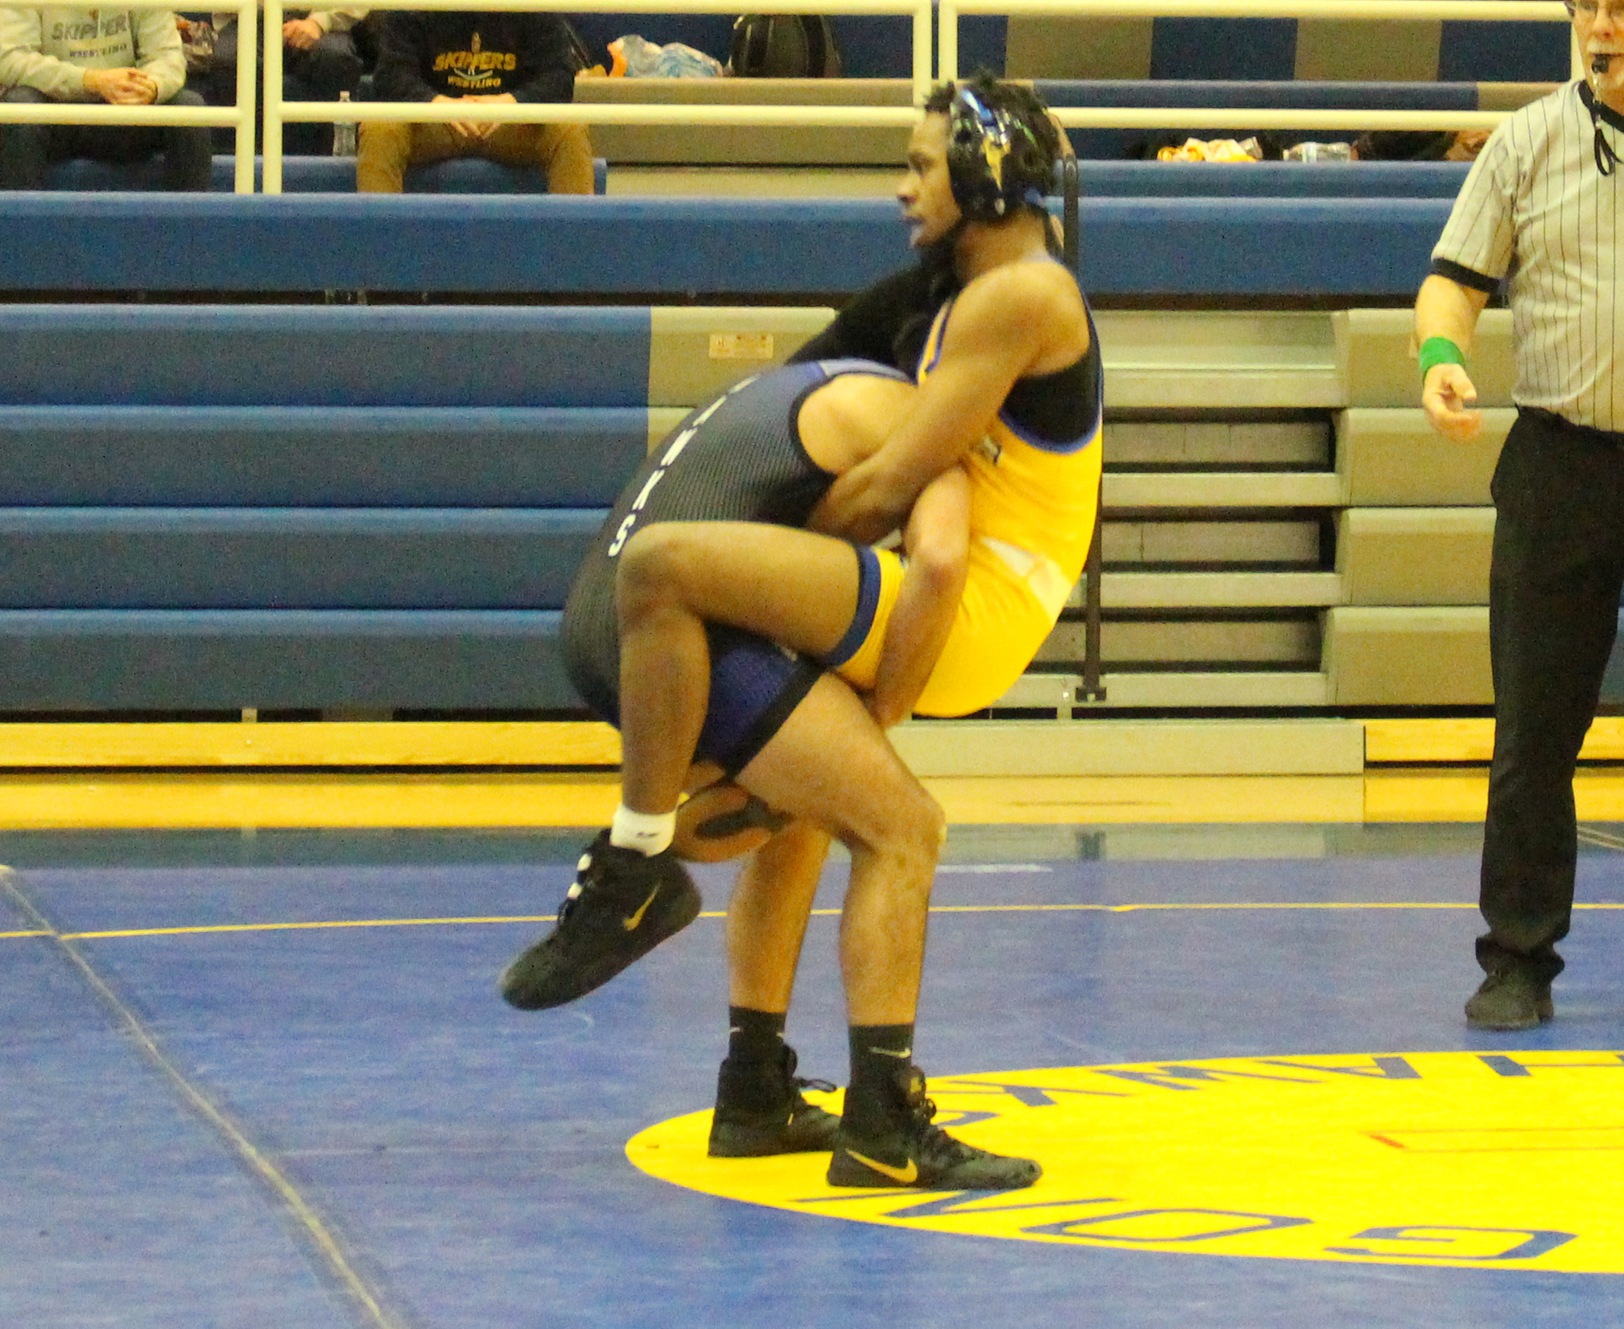 Henry Ford College and St. Clair County wrestlers battle at MCCAA Championship